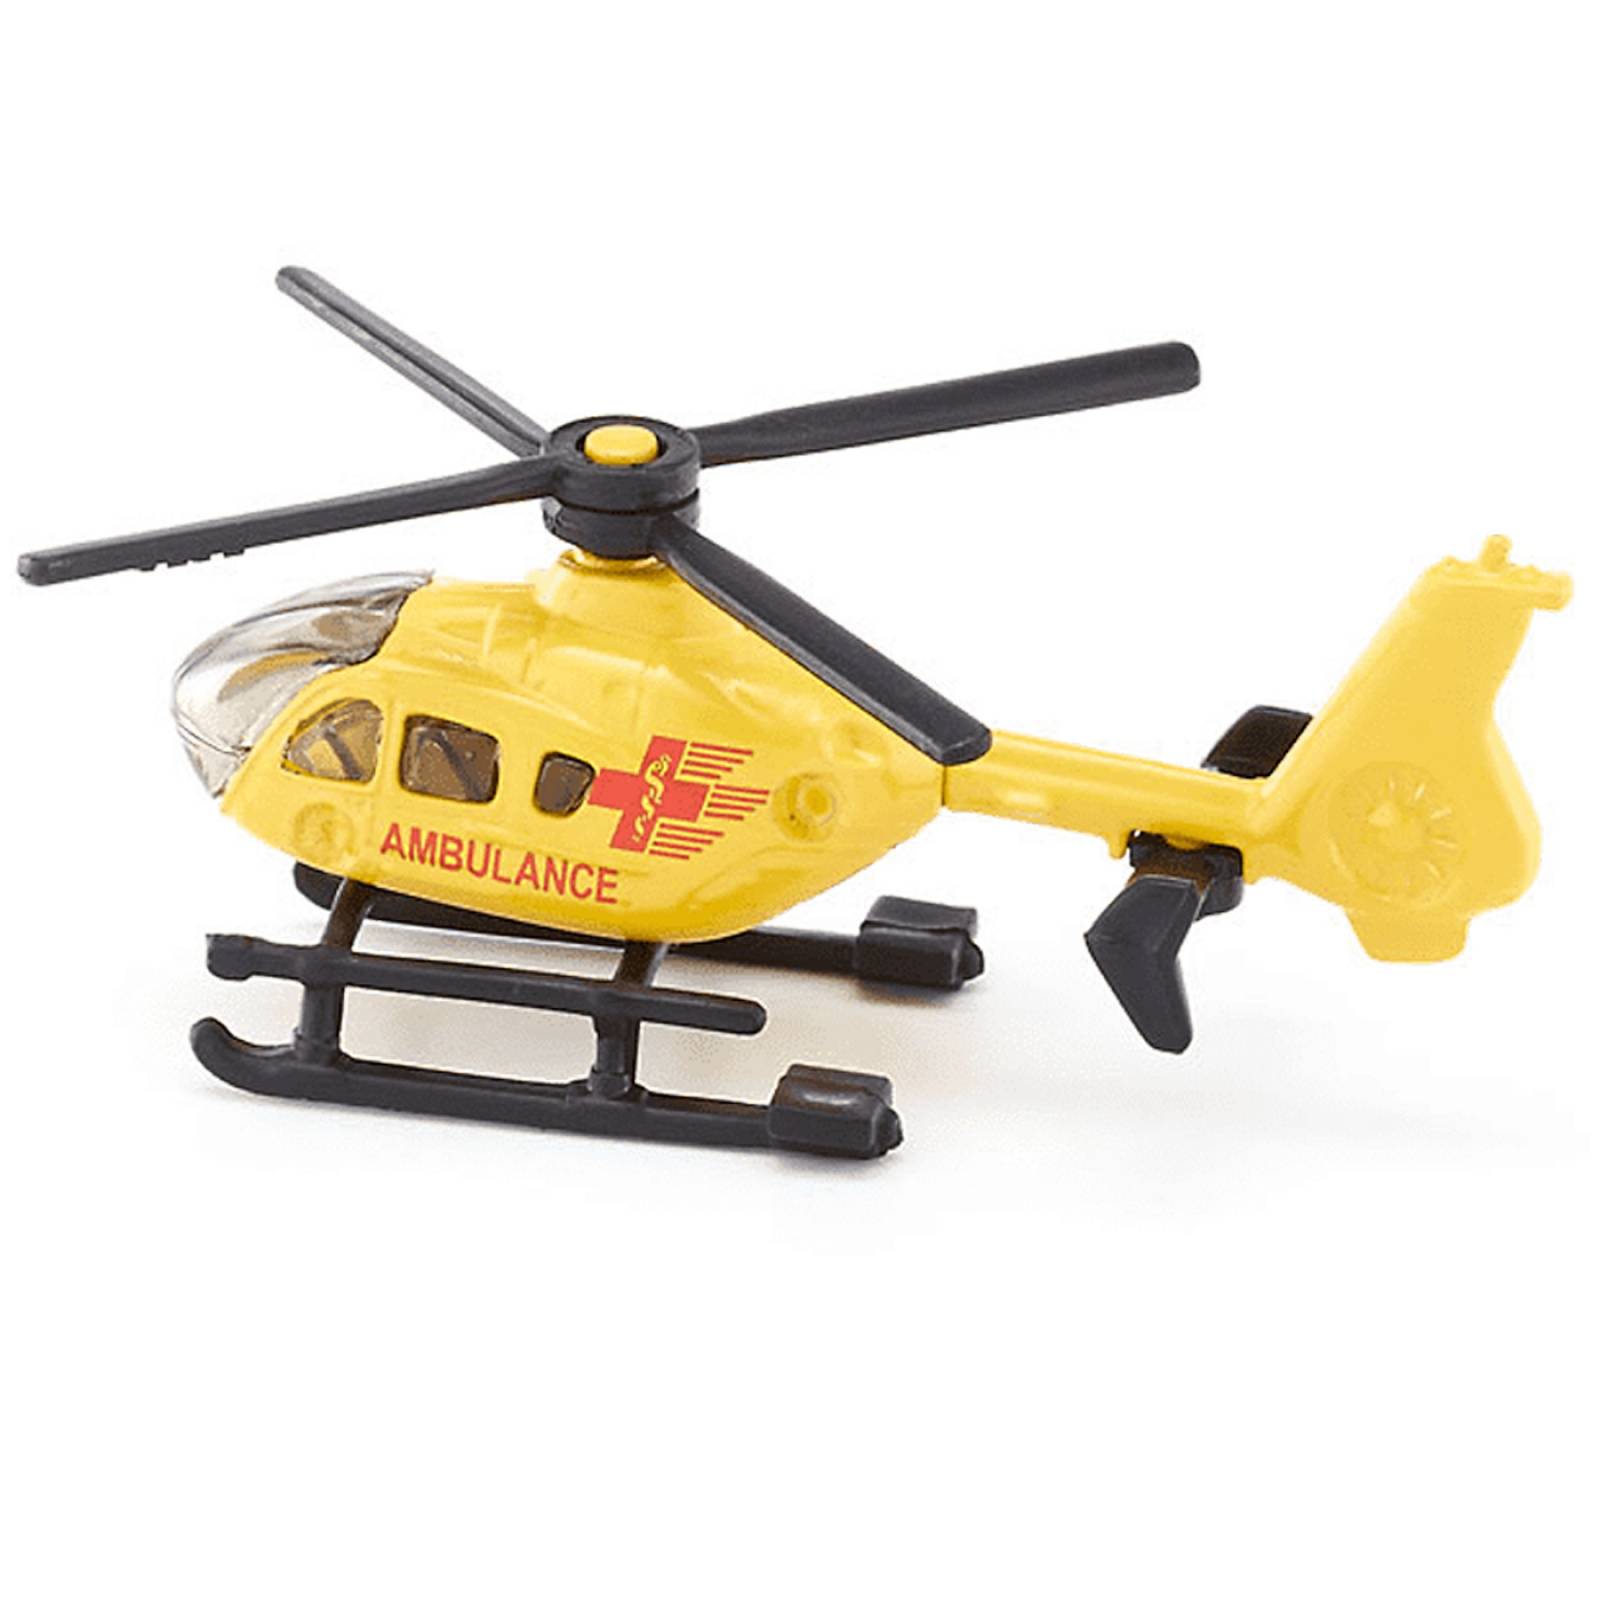 Helicopter Air Ambulance - Single Die-Cast SIKU Toy Vehicle 0856 thumbnails